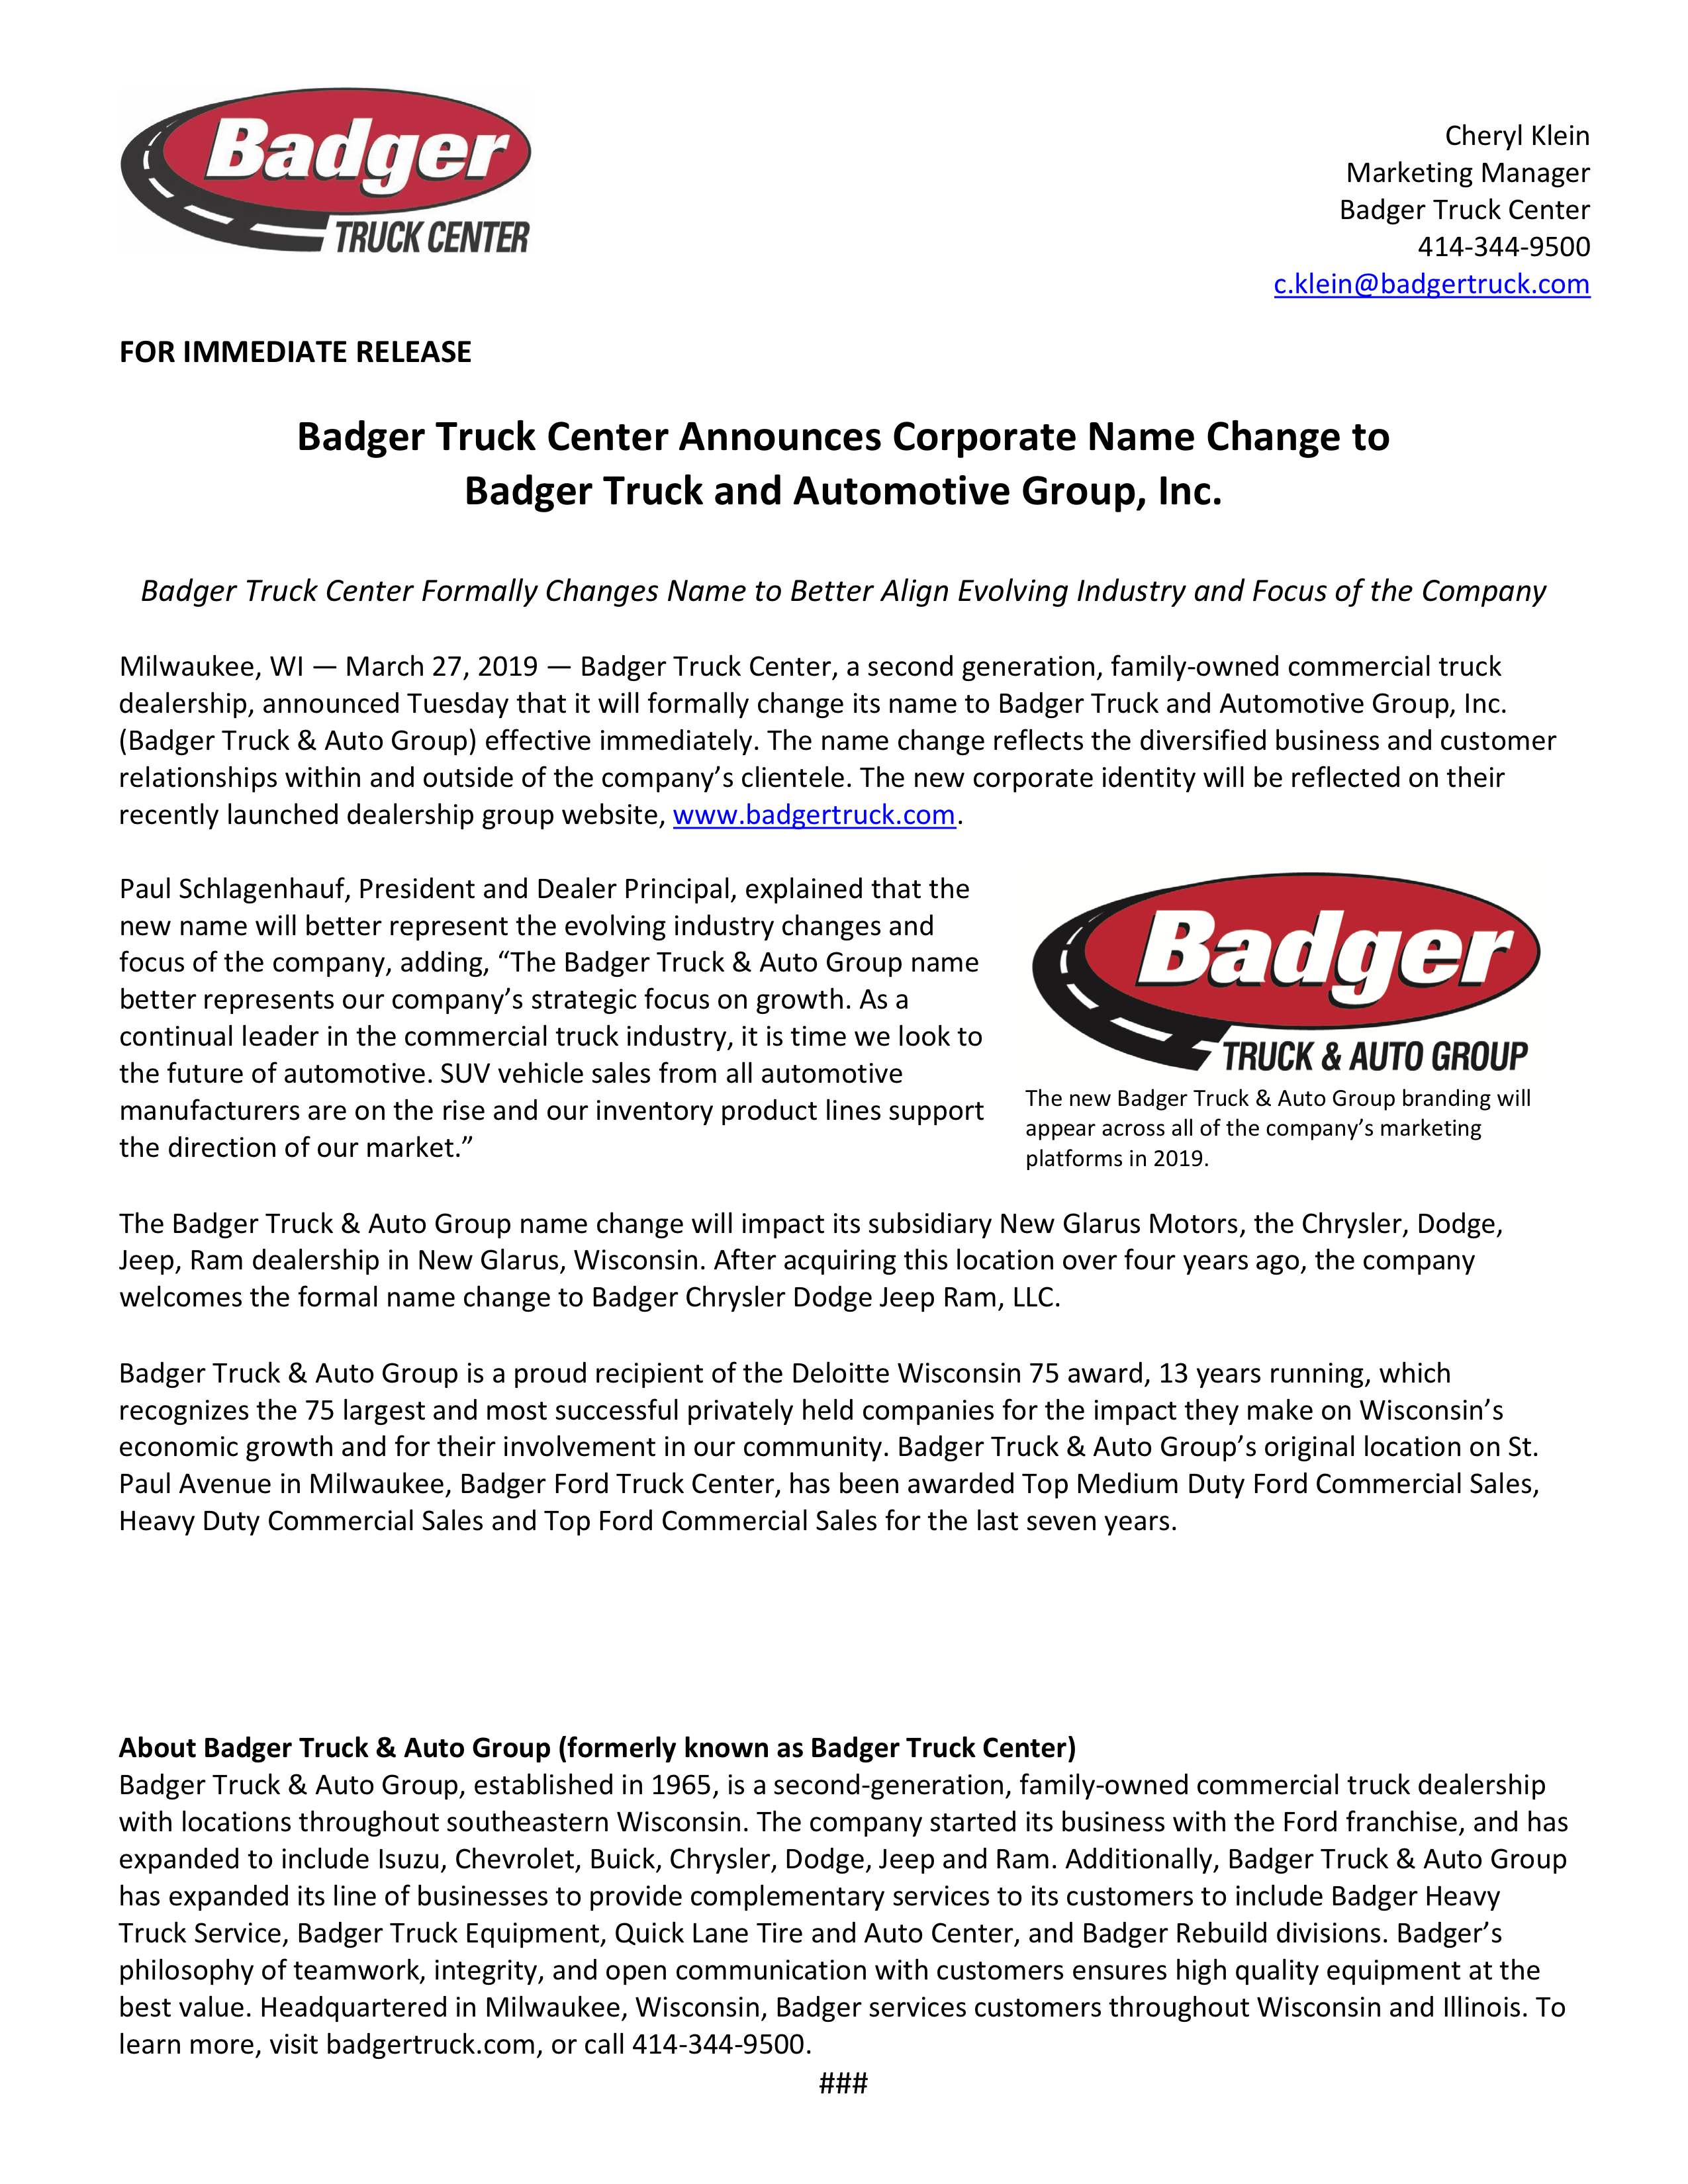 Badger Truck & Auto Group Corporate Name Change